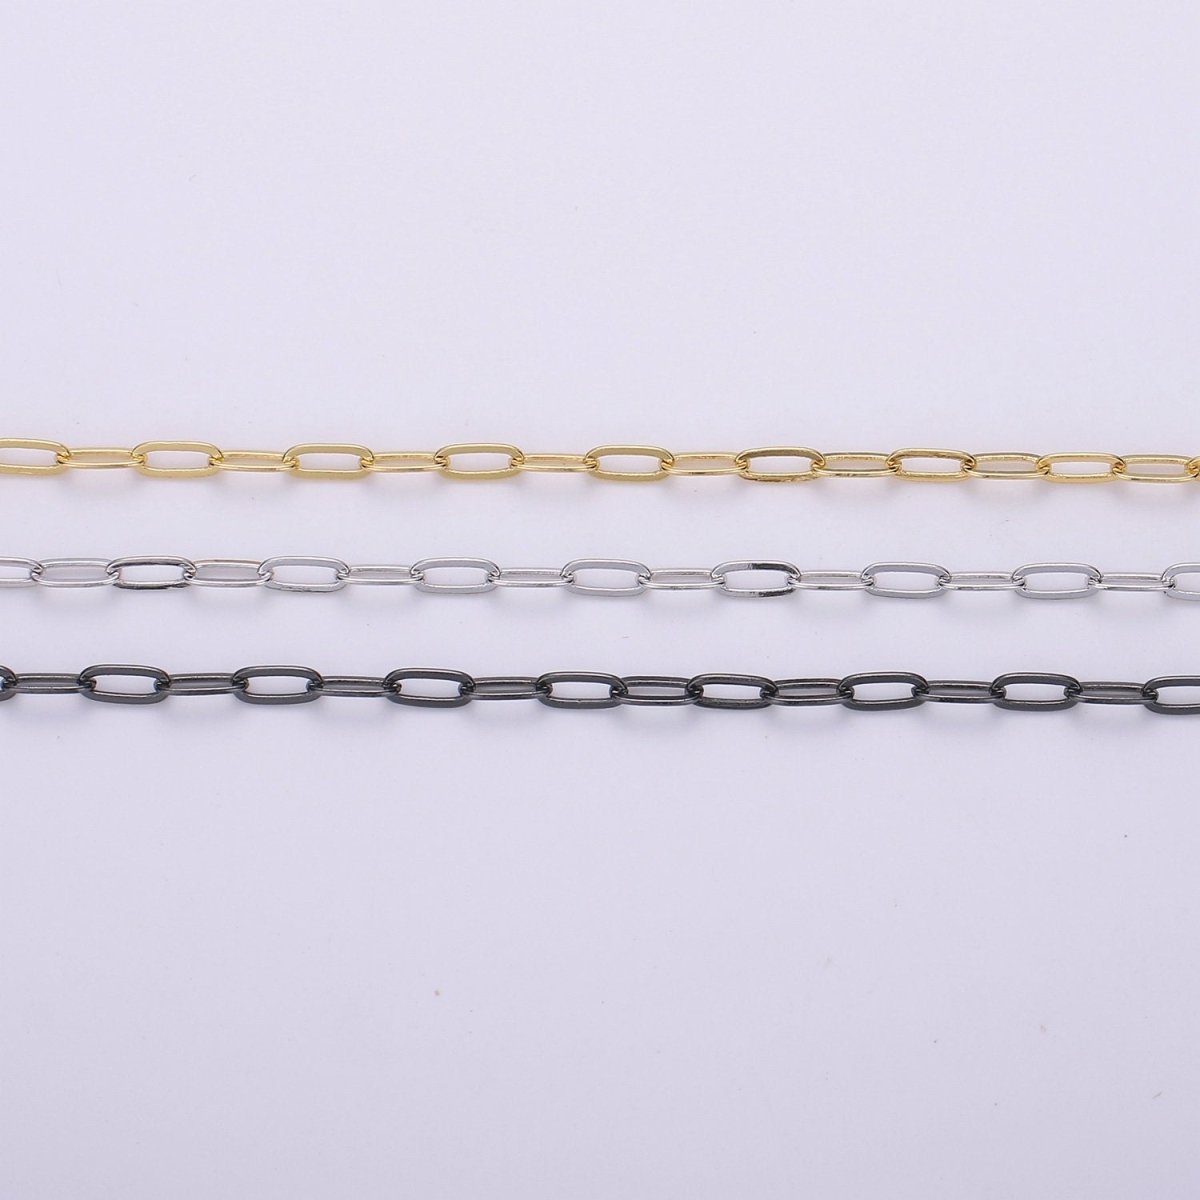 Dainty Silver / Gold / Black Paper Clip Chain, Elongated Chain, 3x6mm Link Chain for Necklace Bracelet Anklet Component ROLL-127 ROLL-128 ROLL-129 OverStock Clearance Pricing - DLUXCA